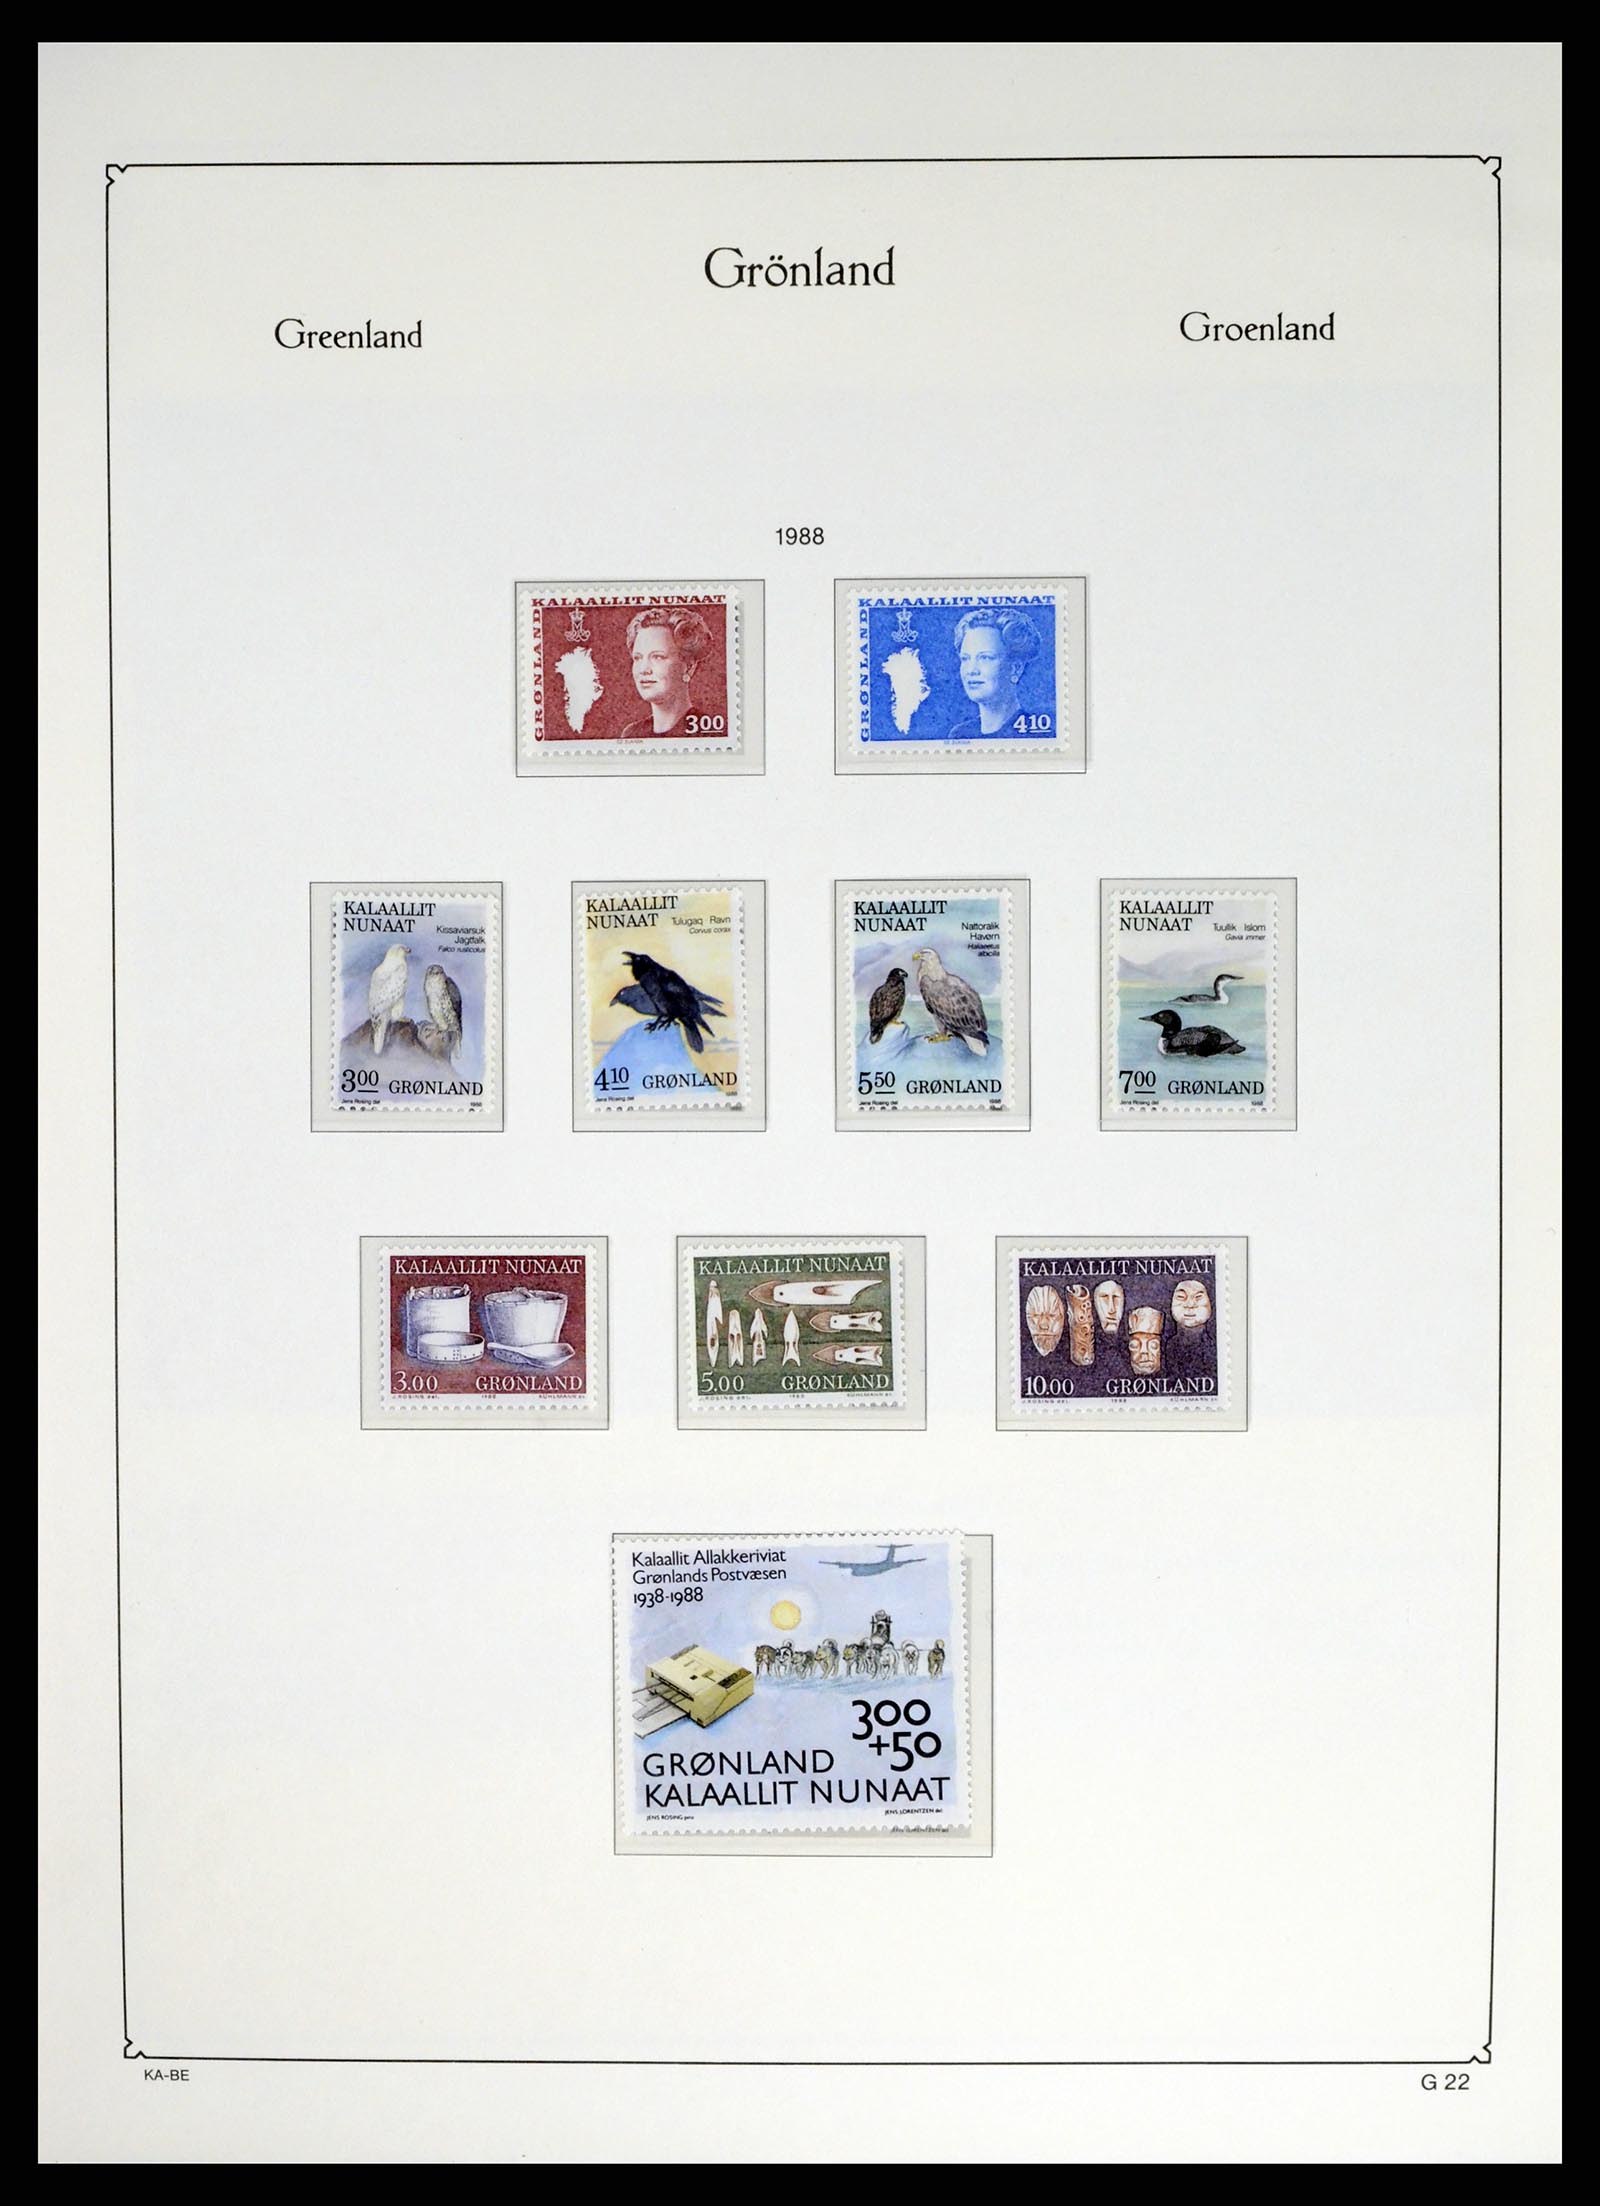 37405 031 - Stamp collection 37405 Greenland 1905-2014.